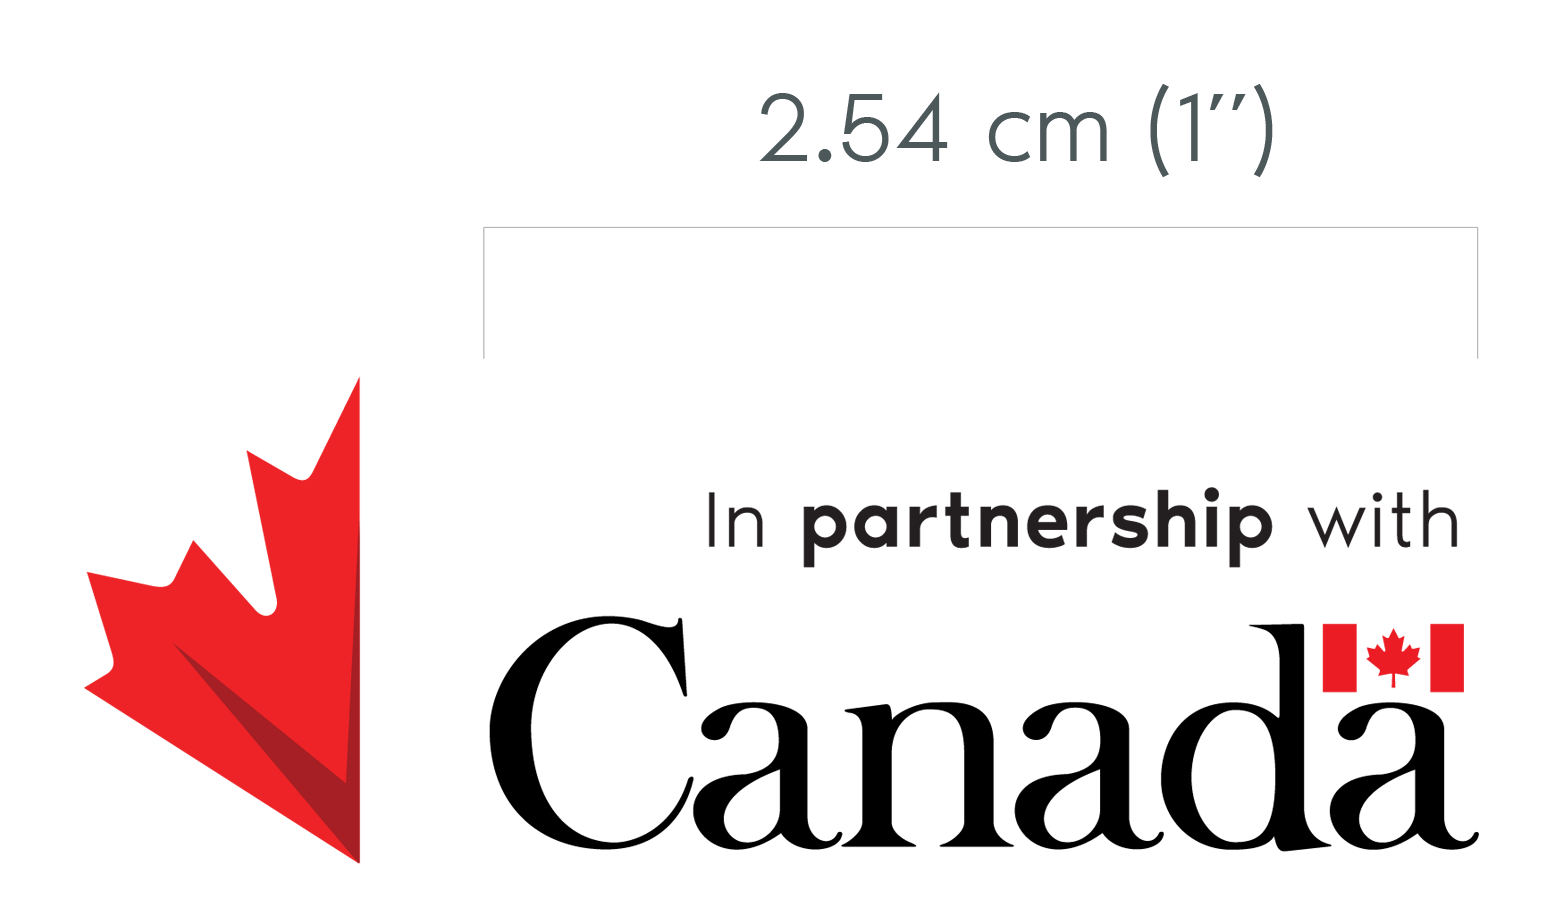 The graphic elements for partners are shown in the centre of the graphic: half of a red maple leaf, the words “In partnership with” and the Canada wordmark. There is a grey, horizontal bracket labelled 1” across the top of the graphic that matches the width of the Canada Wordmark.